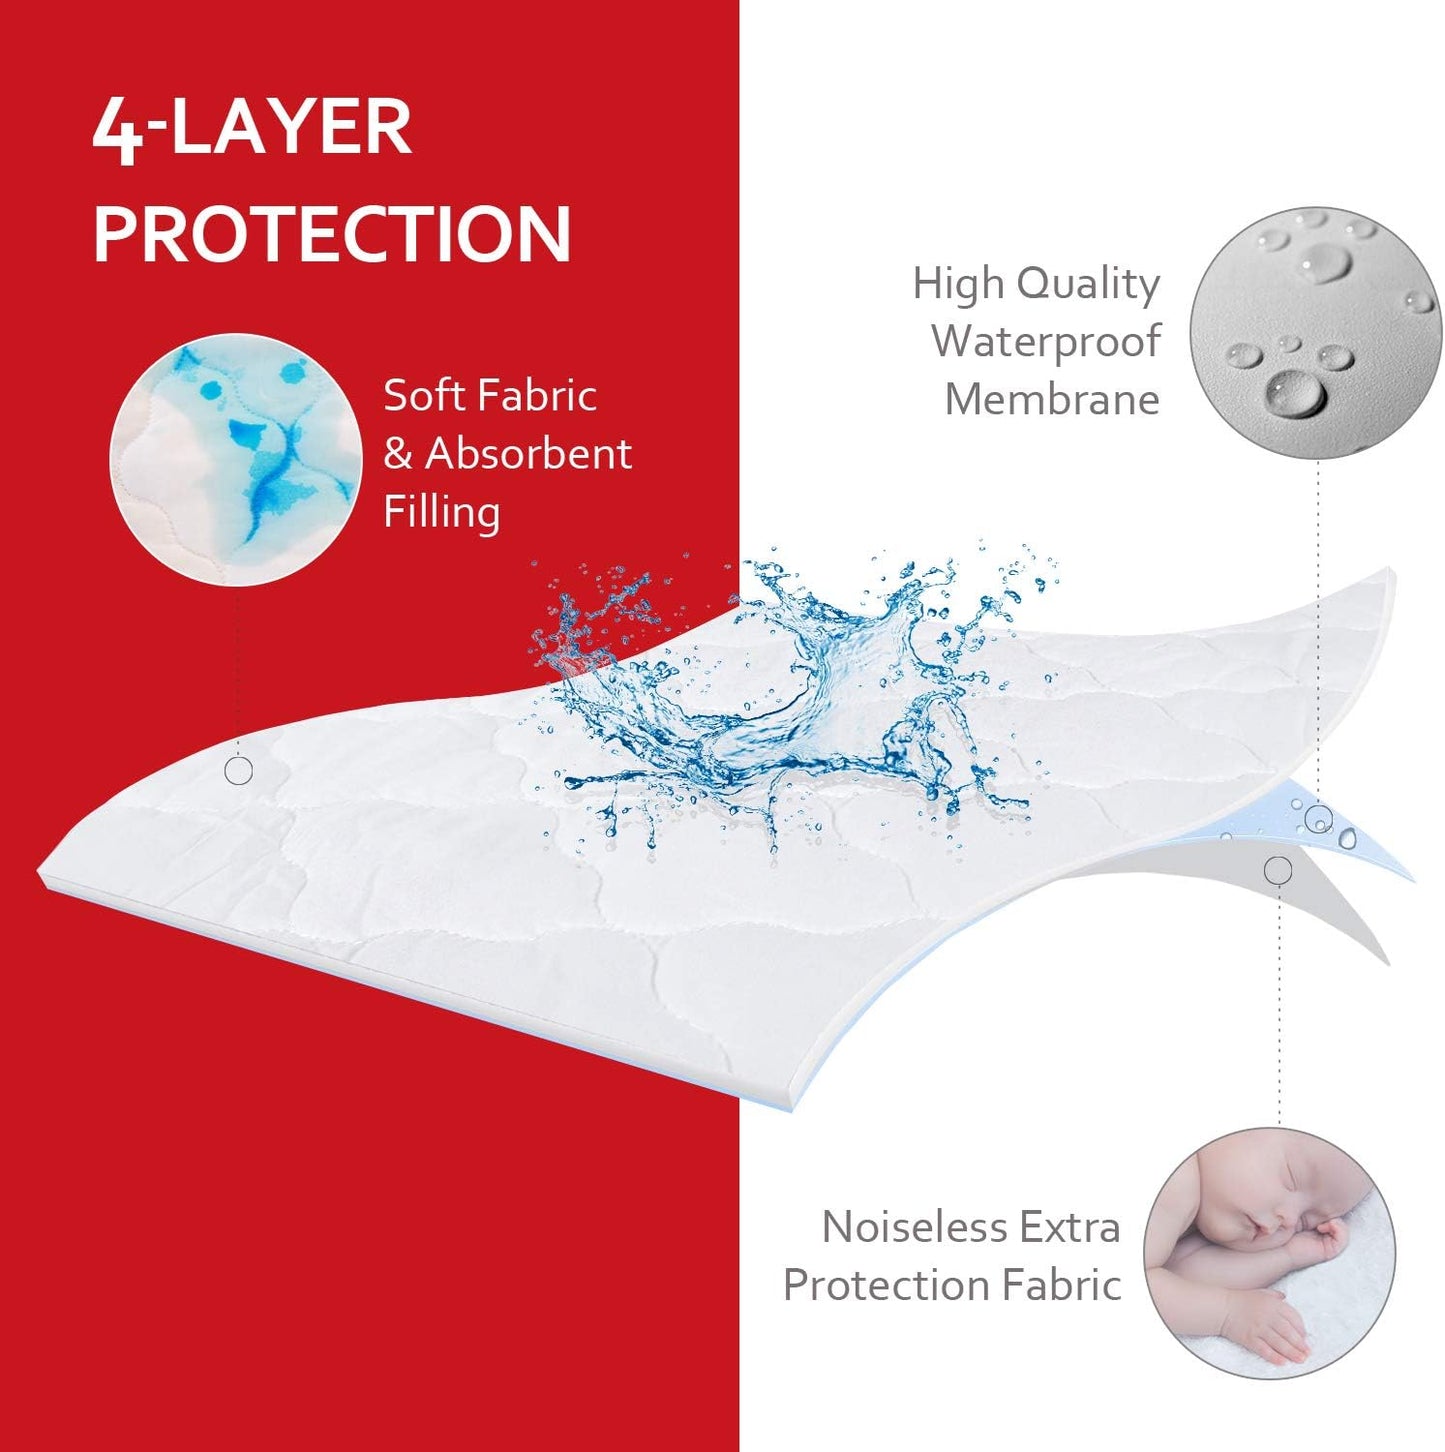 Pack N Play Mattress Pad Cover/ Protector - Ultra-Soft Microfiber, Waterproof, White (Graco Pack 'n Play Travel Dome LX Playard)